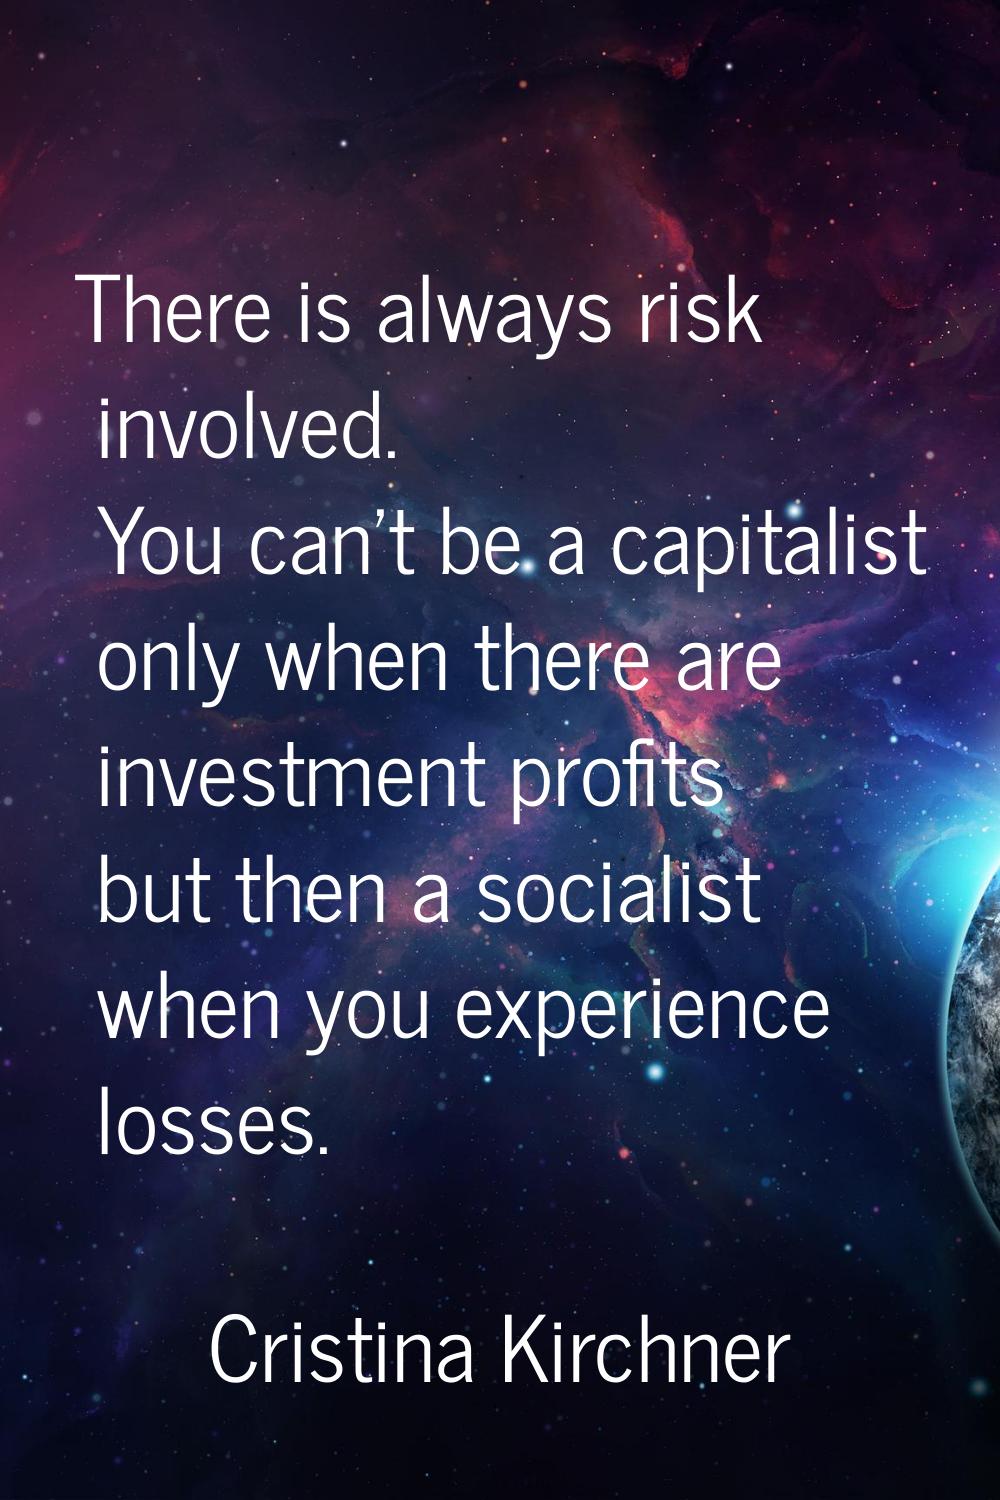 There is always risk involved. You can't be a capitalist only when there are investment profits but